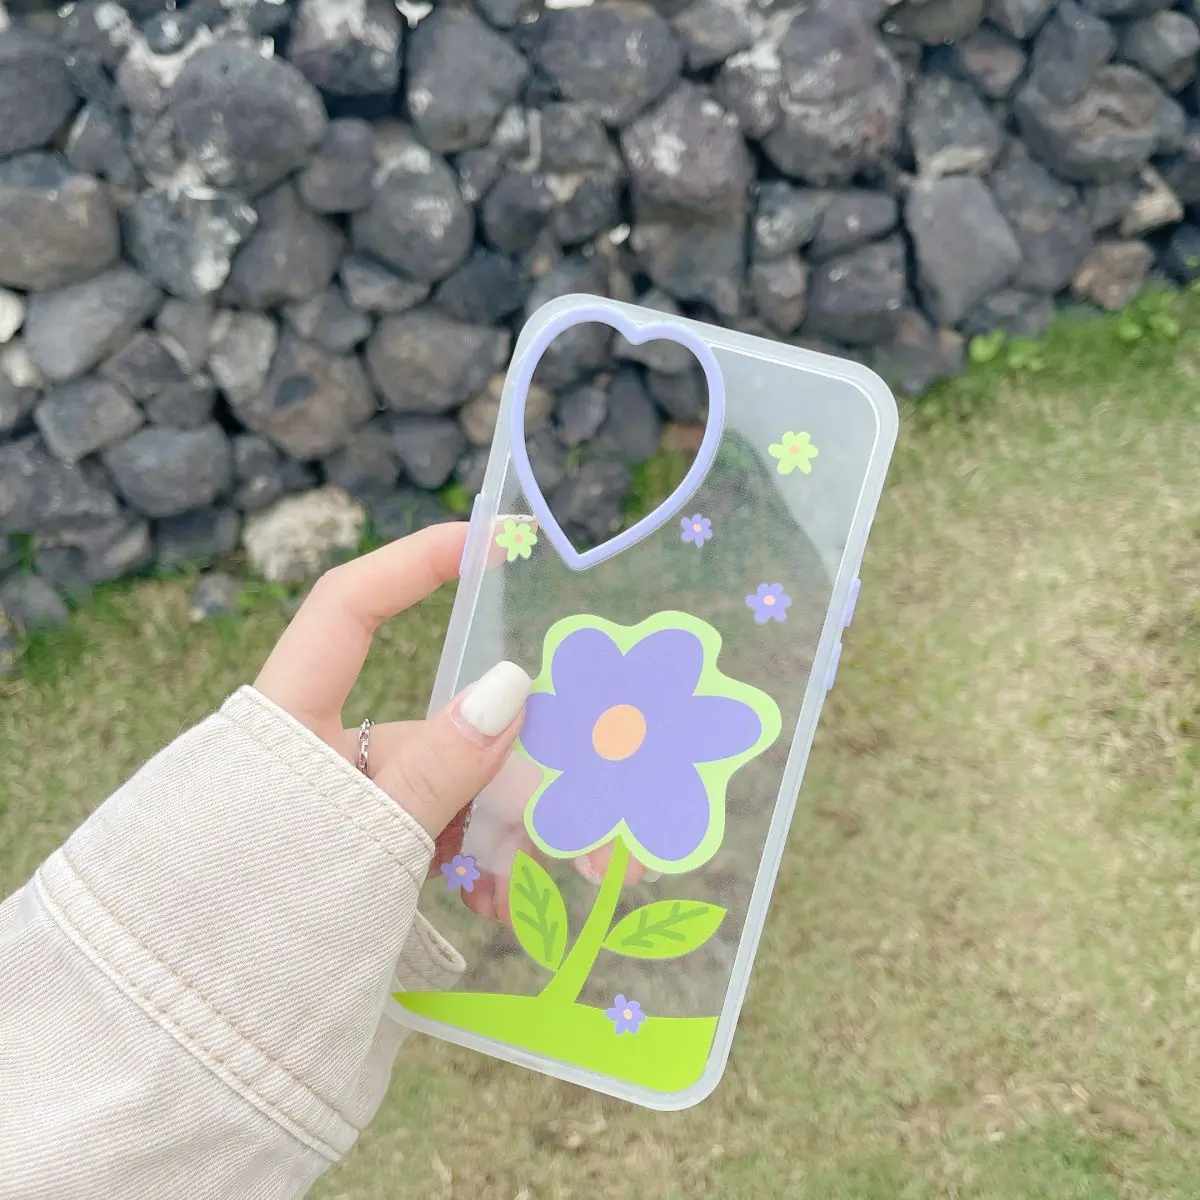 

Purple flower mobile phone case for iPhone7 iPhone8 iPhoneX iPhoneXS iPhoneXR iPhone11 iPhone12